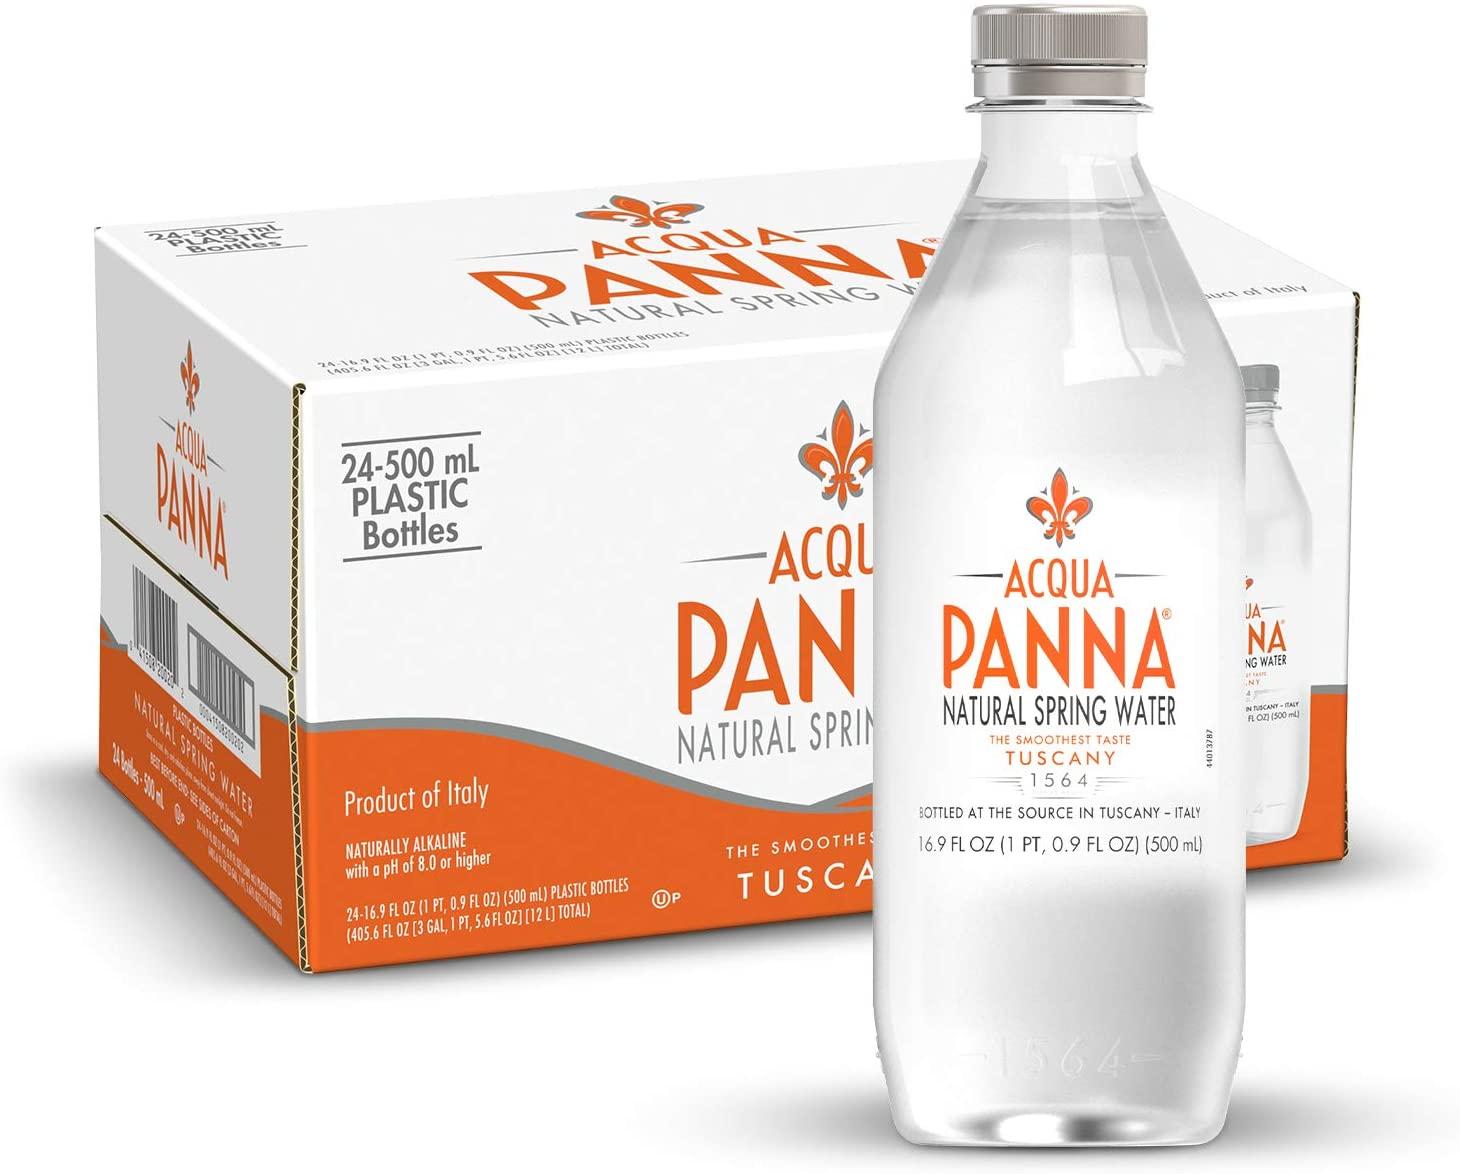 24 Acqua Panna Natural Spring Water Plastic Bottles for $7.56 Shipped